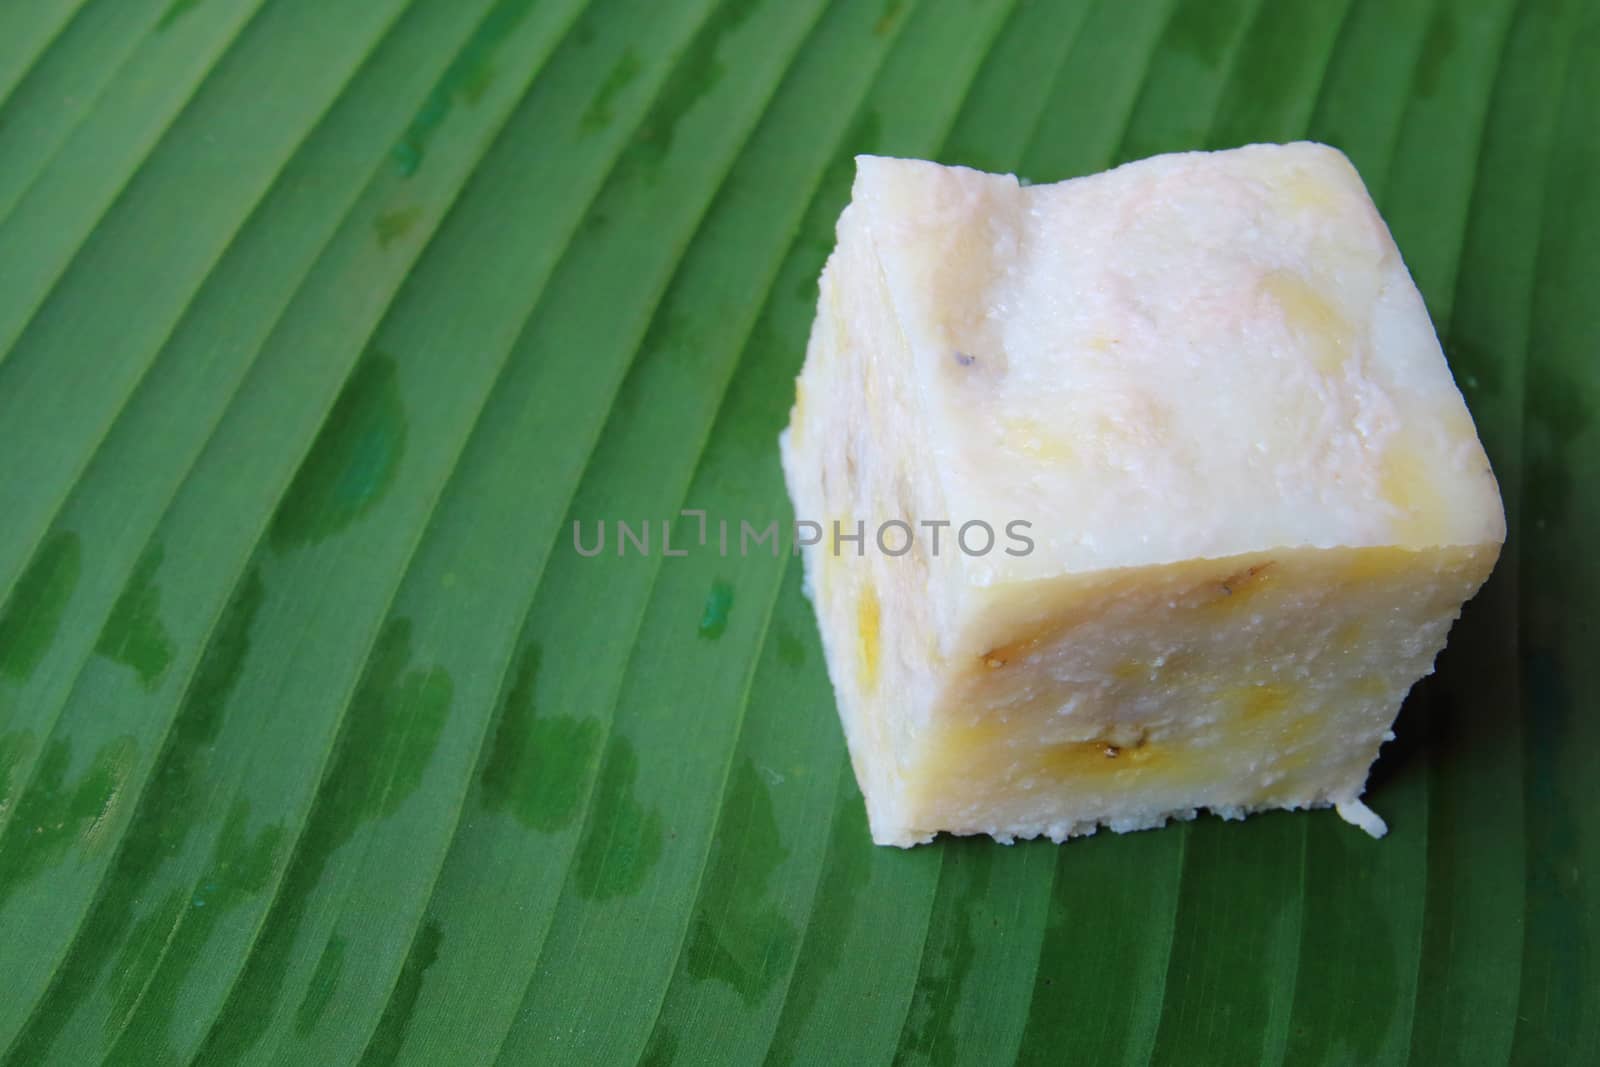 The cube of thai dessert made from banana put on banana leaf.